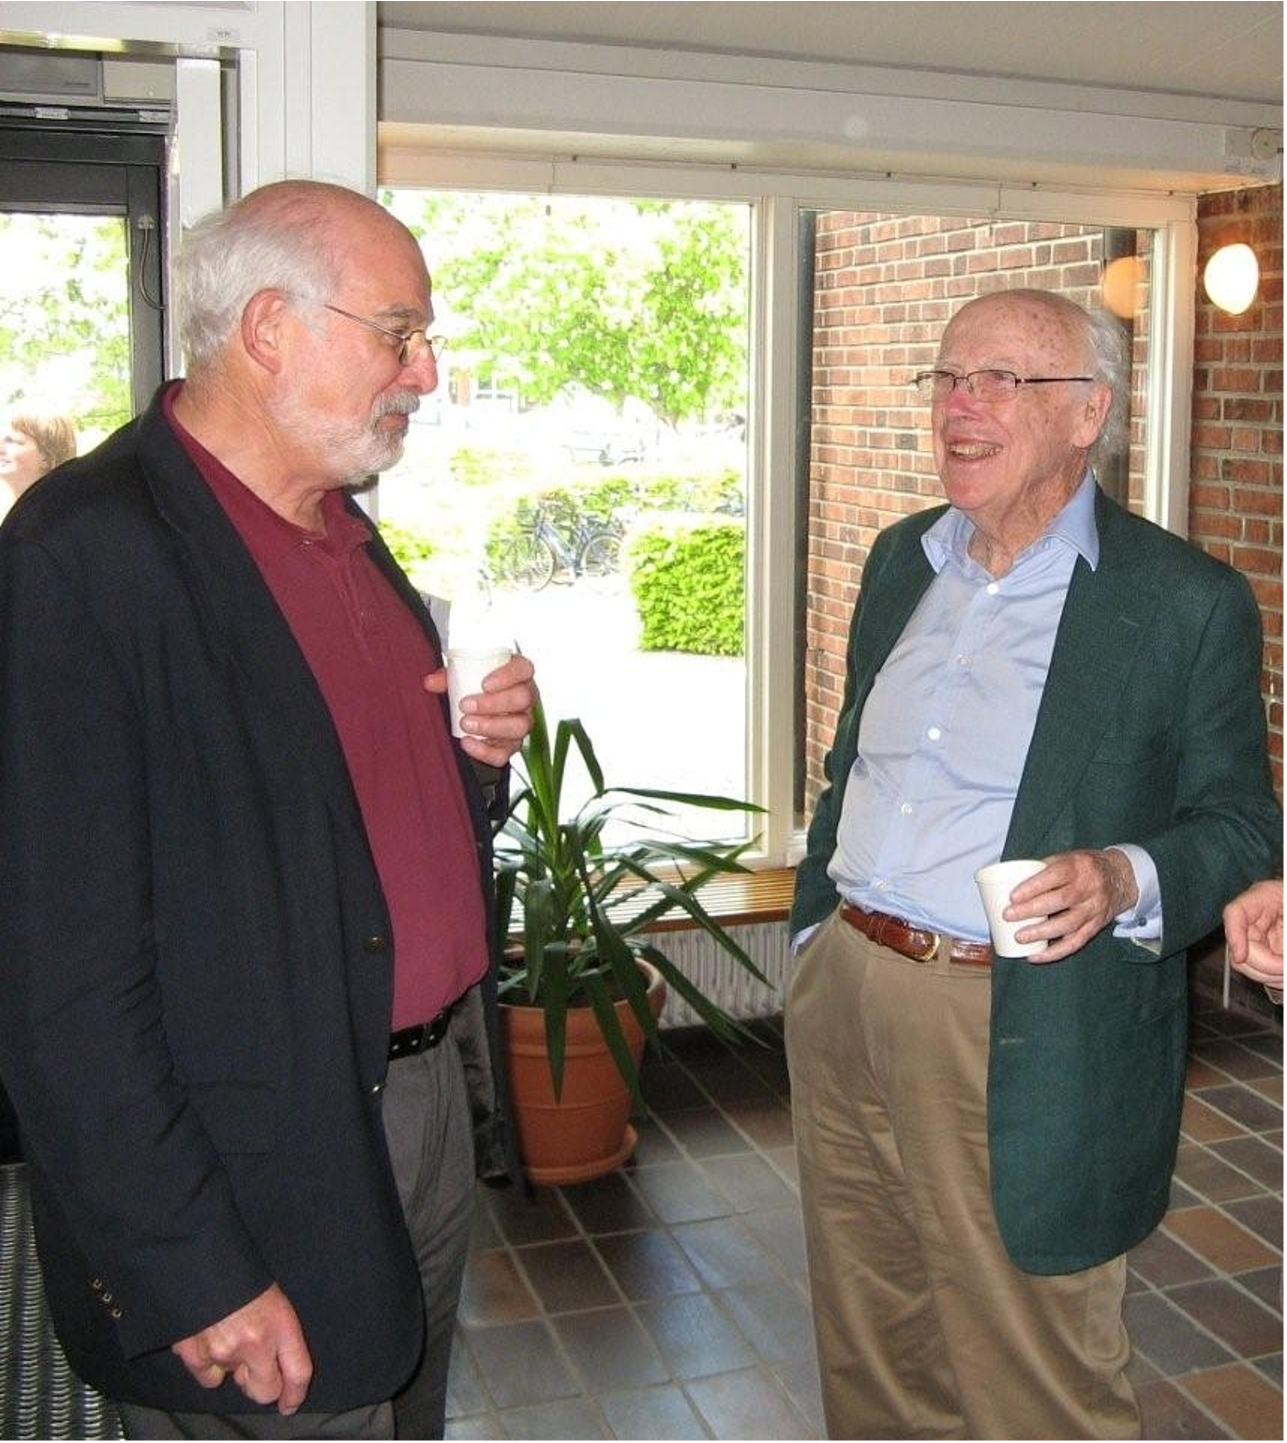 Lawrence Berliner (left) with James Watson who co-discovered the structure of DNA in 1953 with Francis Crick. Photograph provided by Lawrence Berliner.